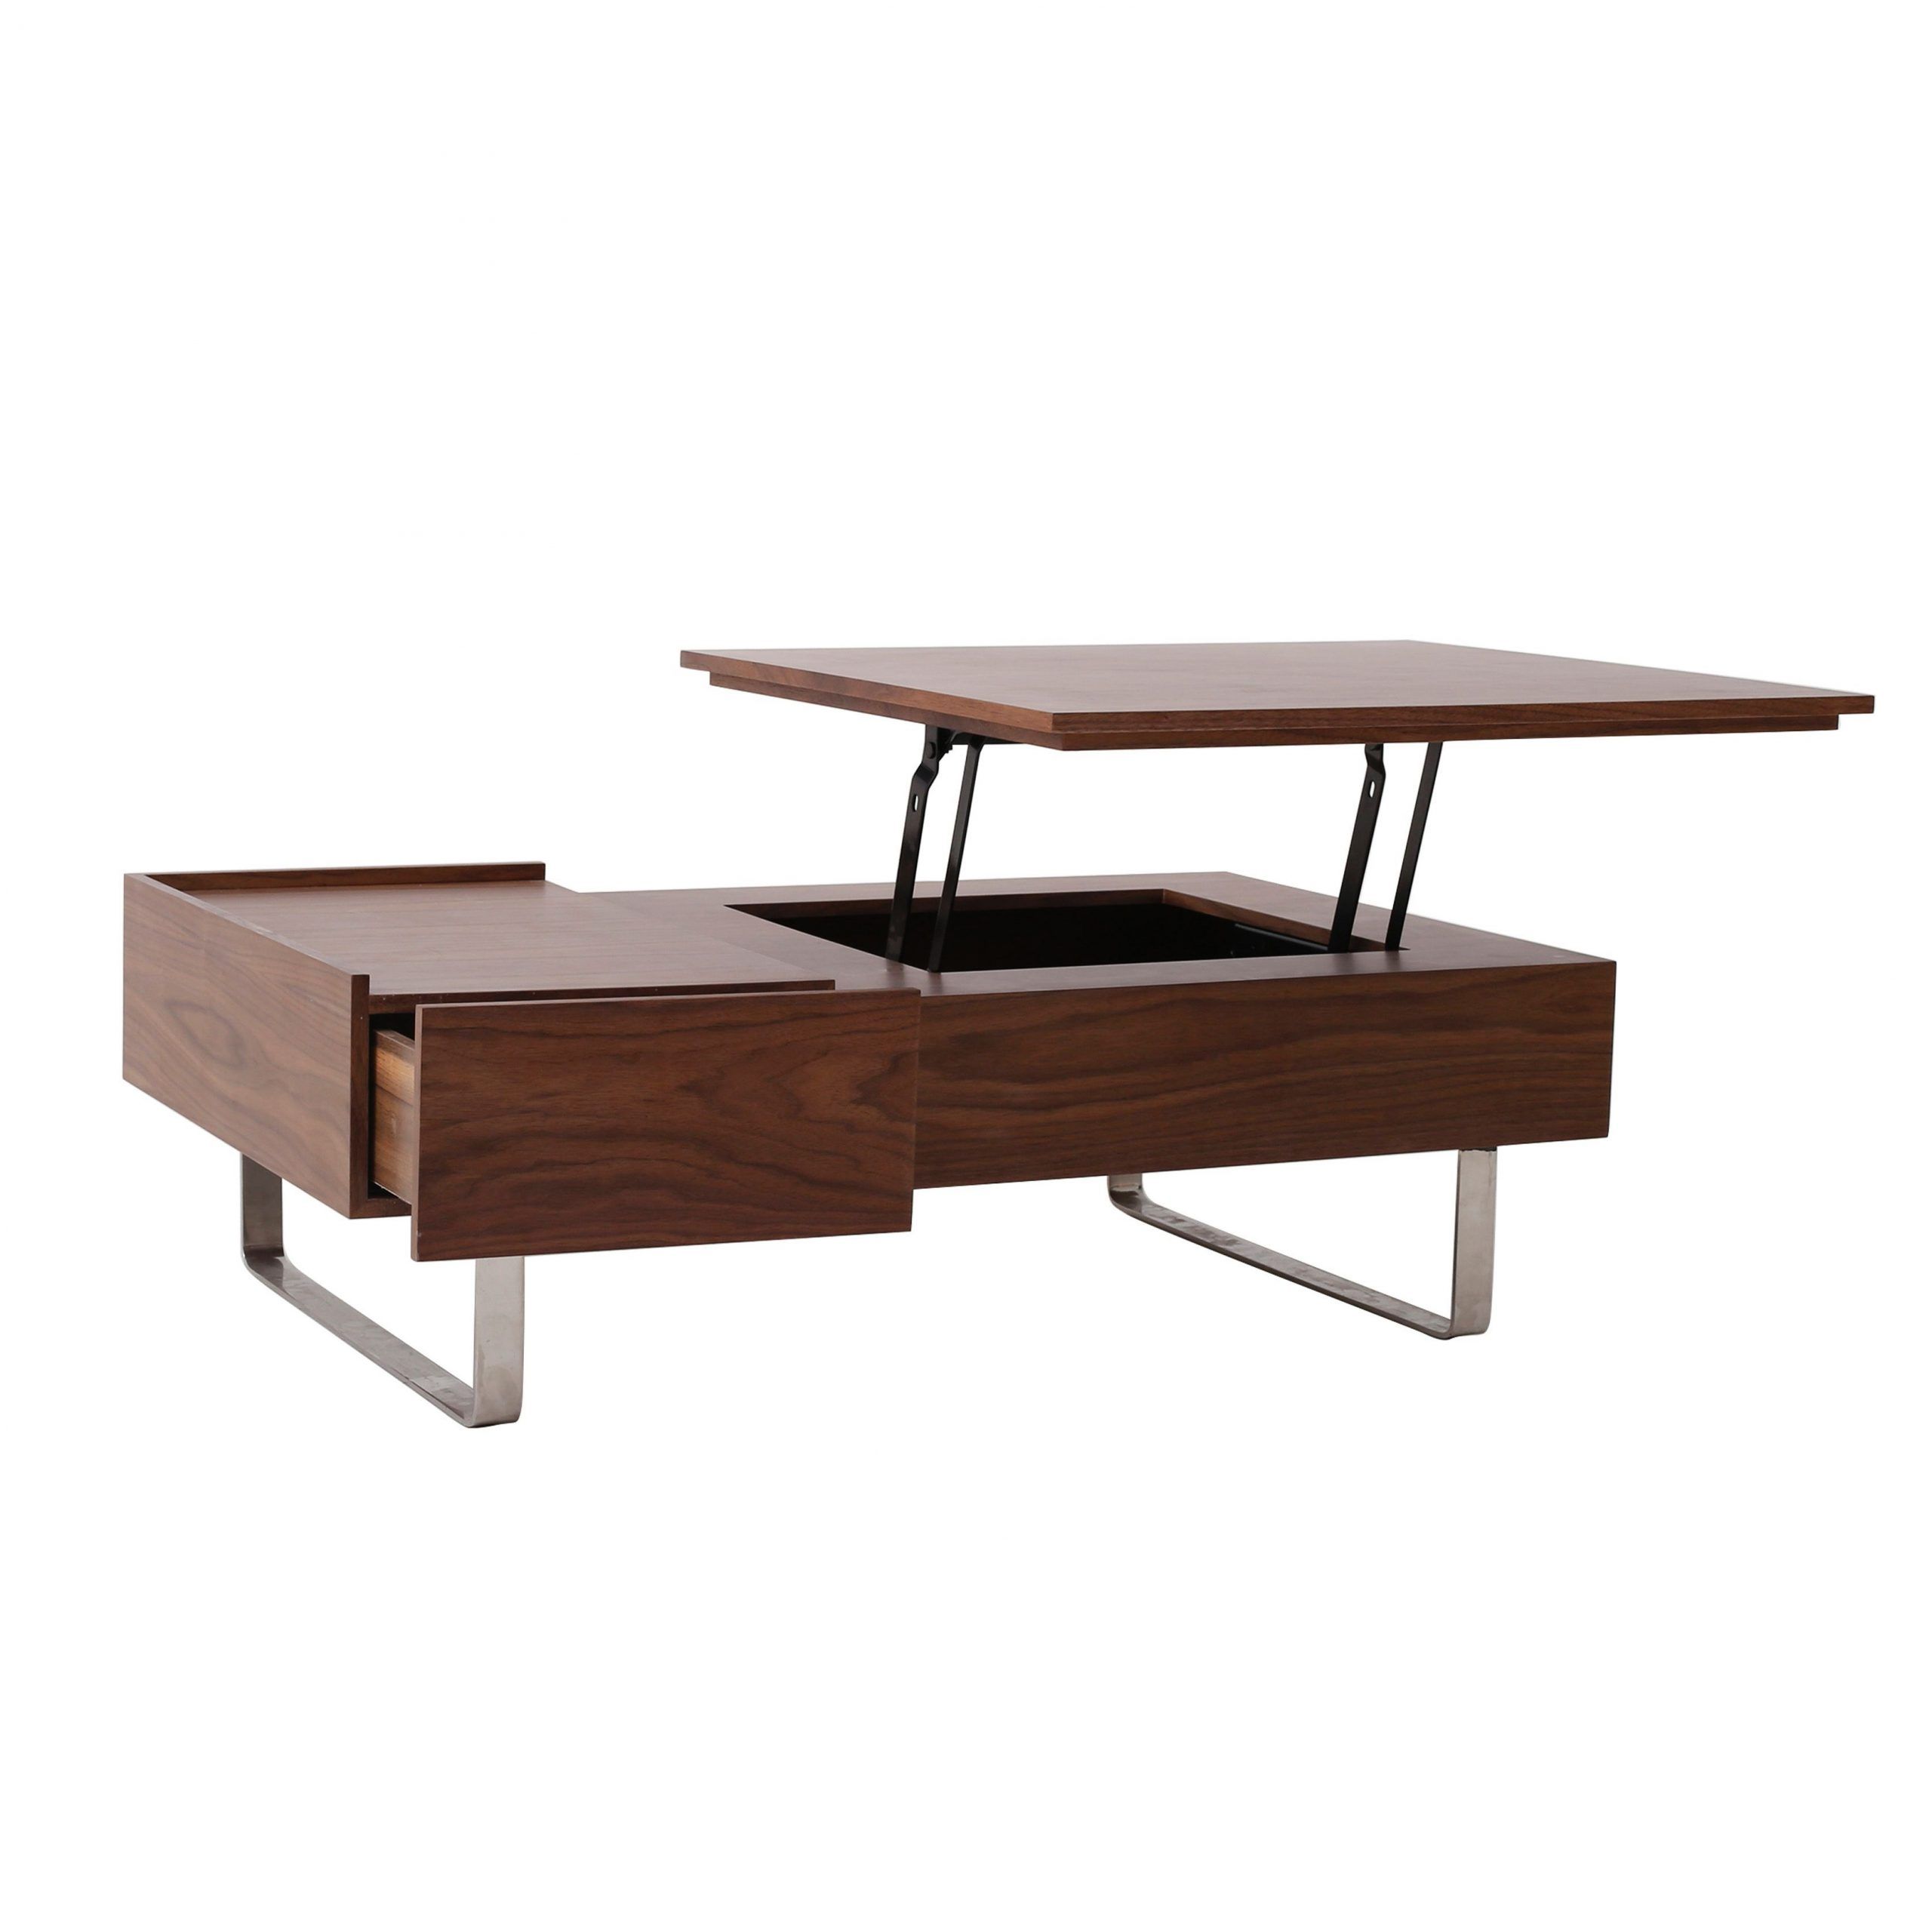 Denzel Kd Rectangular Coffee Table W/ Open Mechanism With Regard To Trendy Open Storage Coffee Tables (View 8 of 20)